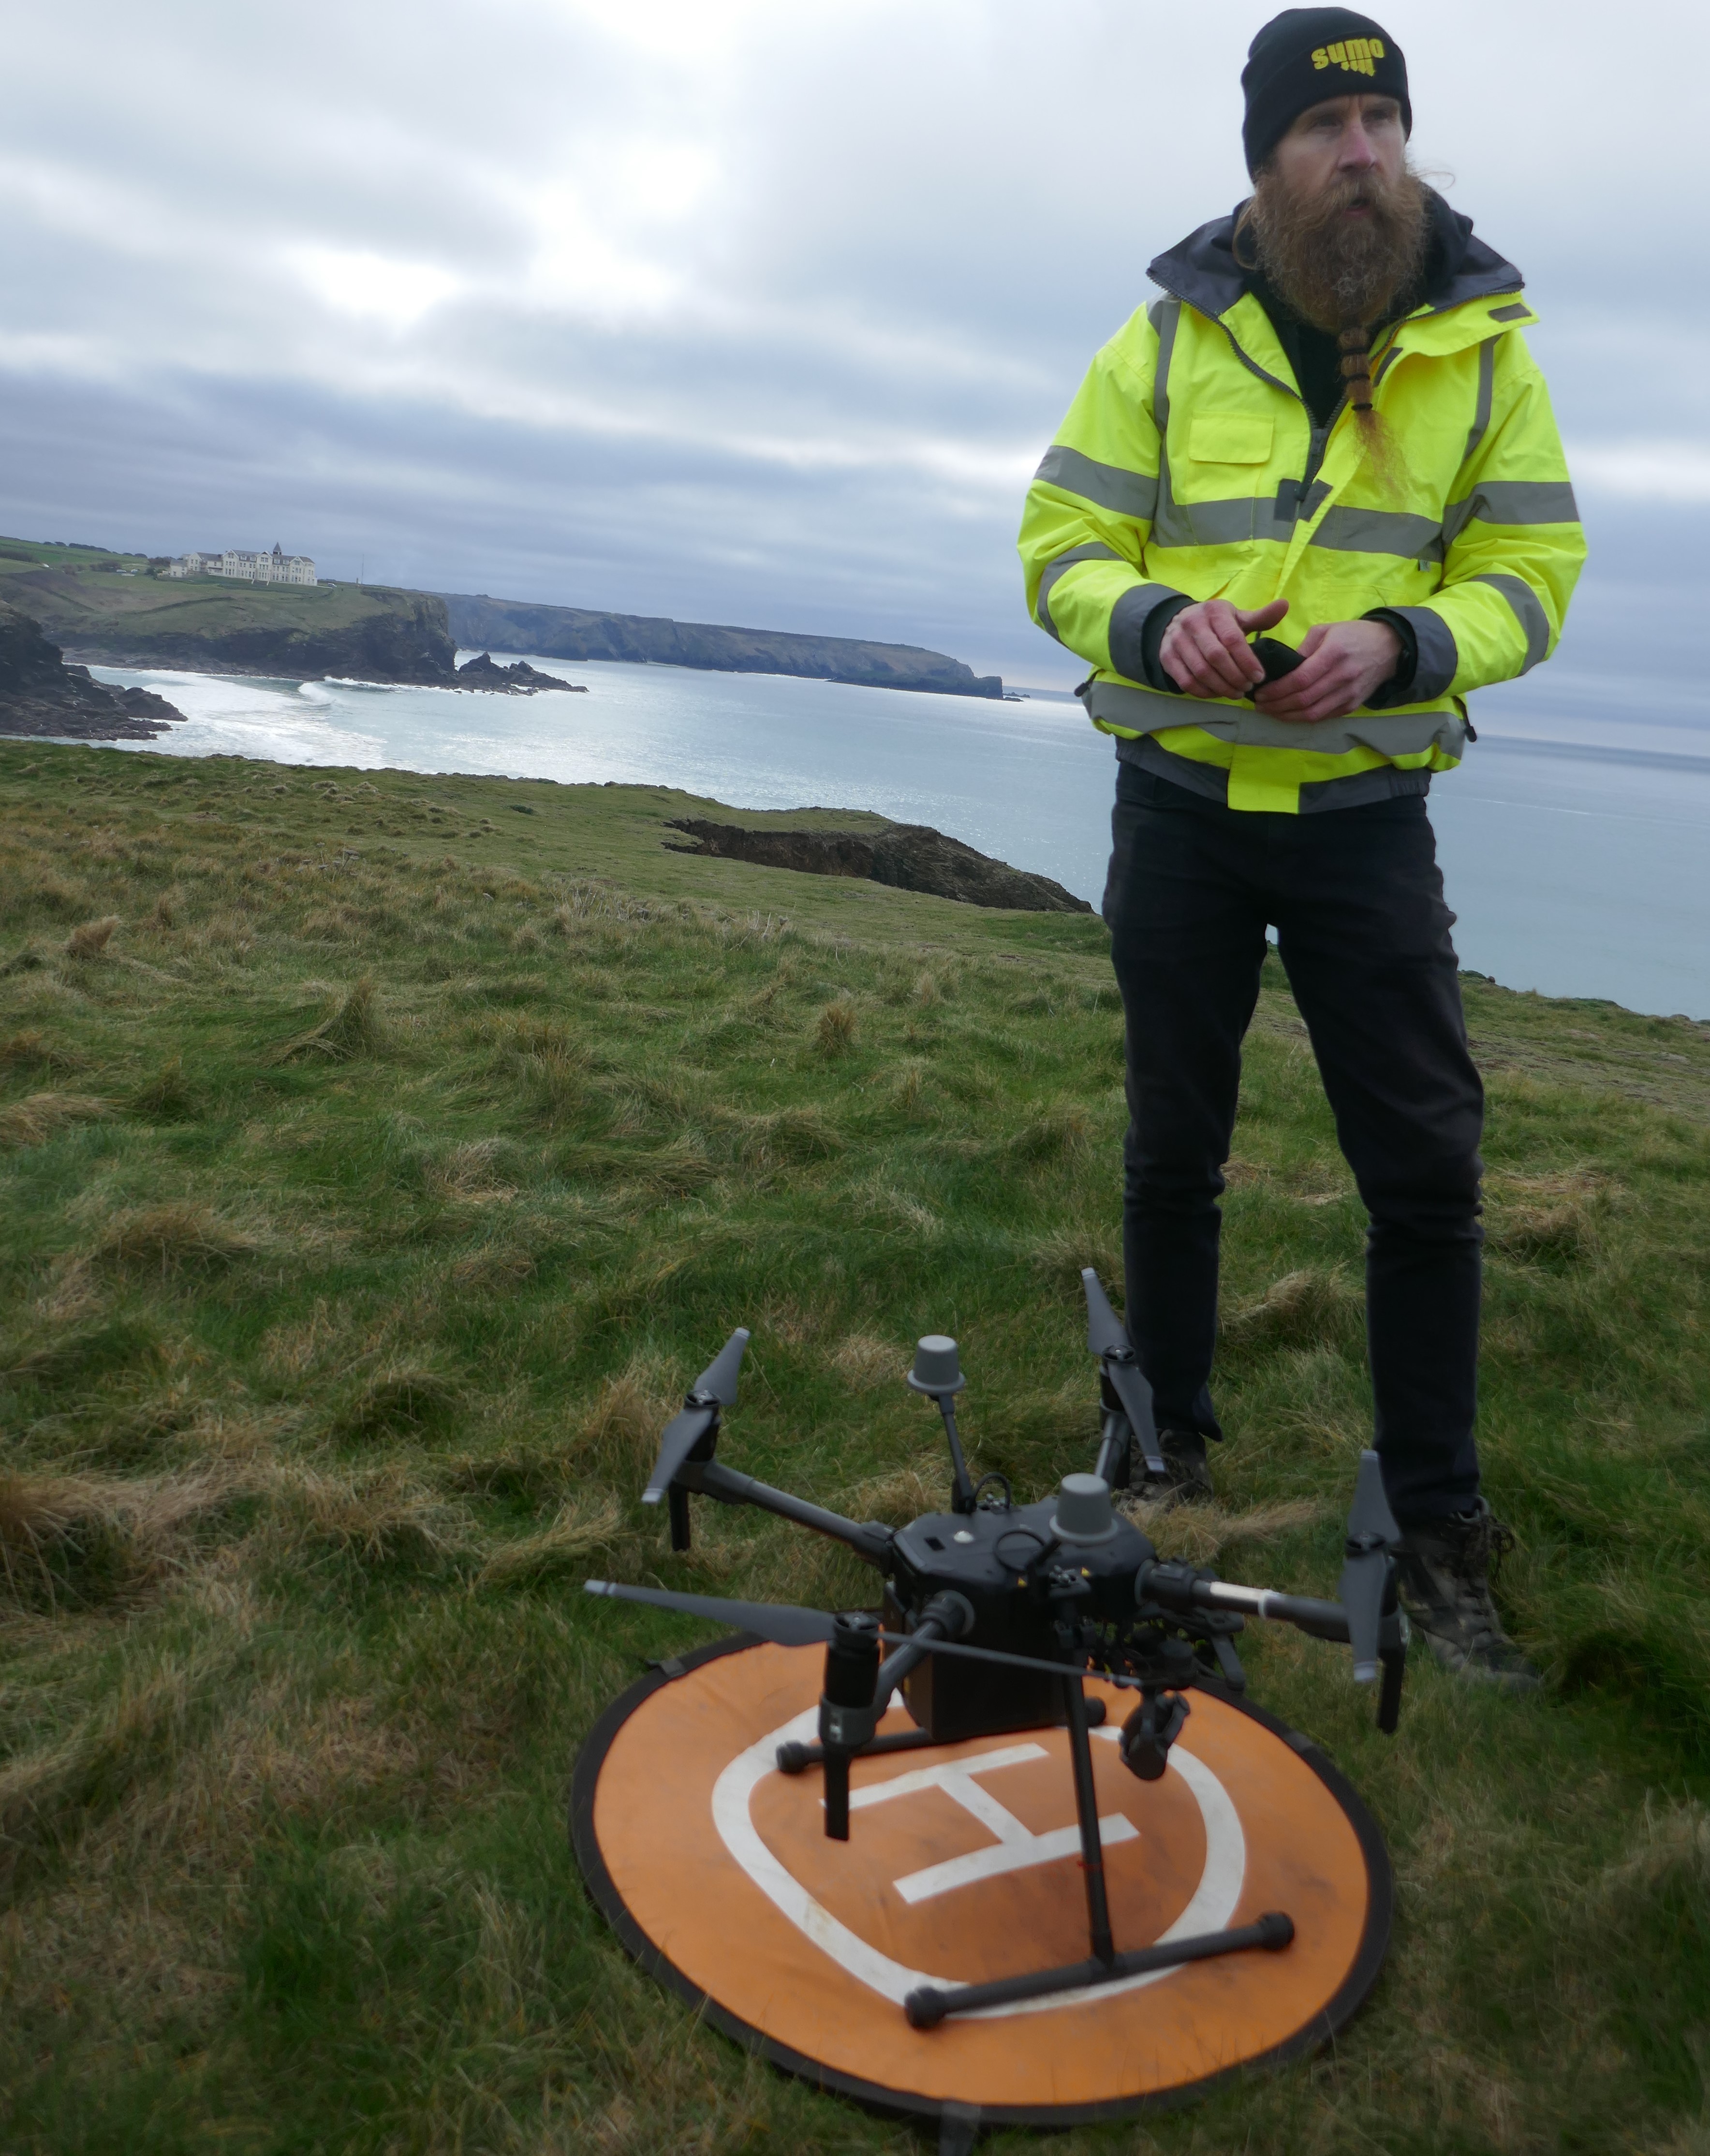 A spidery black drone, almost knee height, stands on a white H on a miniature orange landing pad. Behind is the rough grassy headland and grey sea and sky, with a surveyor holding the drone control standing out in a high visibility luminous yellow coat.